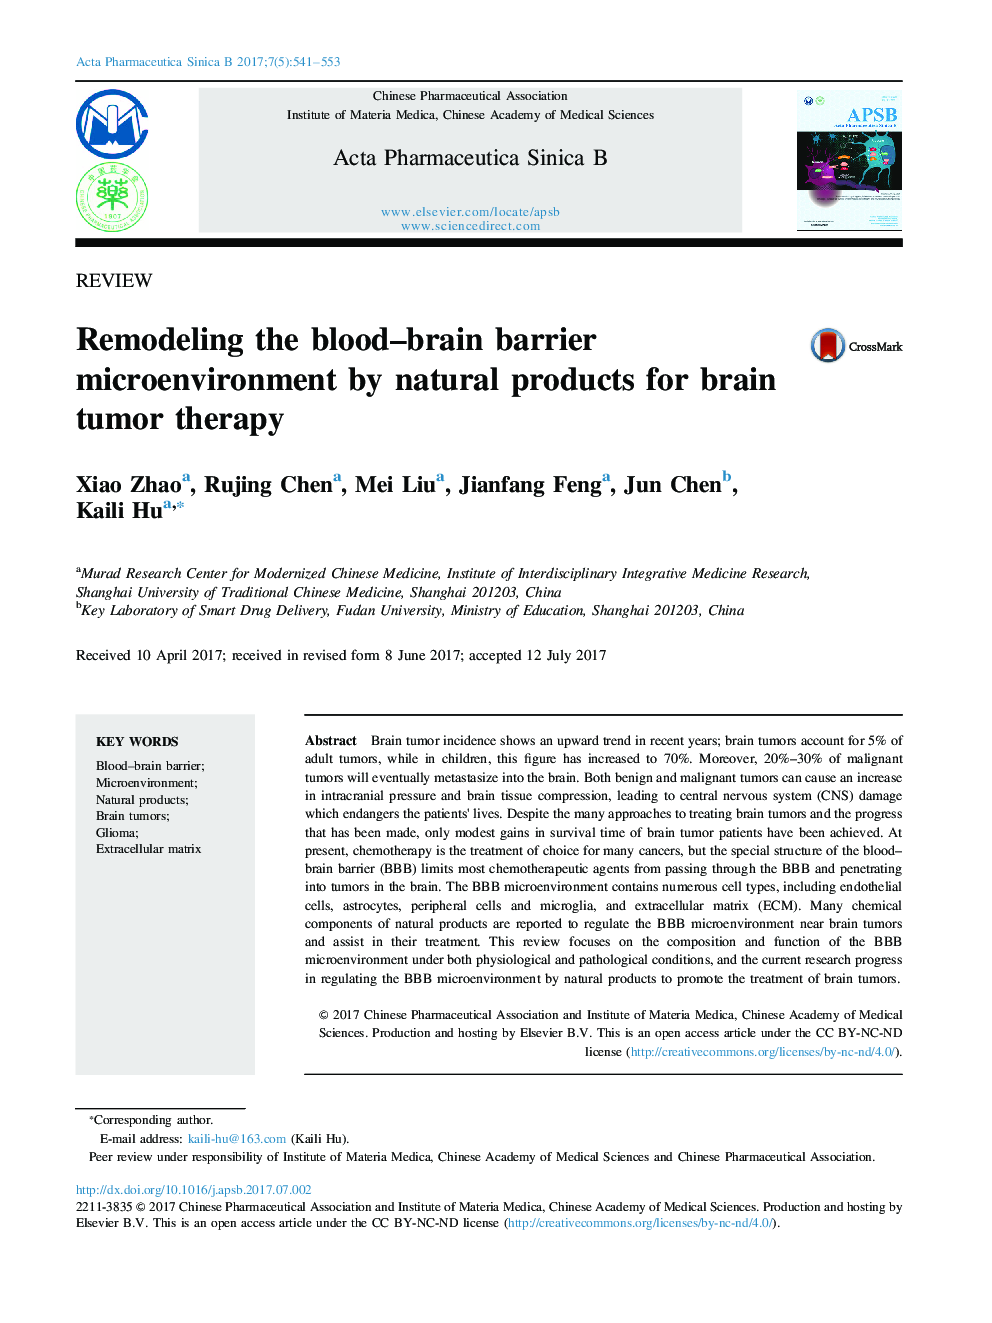 Remodeling the blood-brain barrier microenvironment by natural products for brain tumor therapy